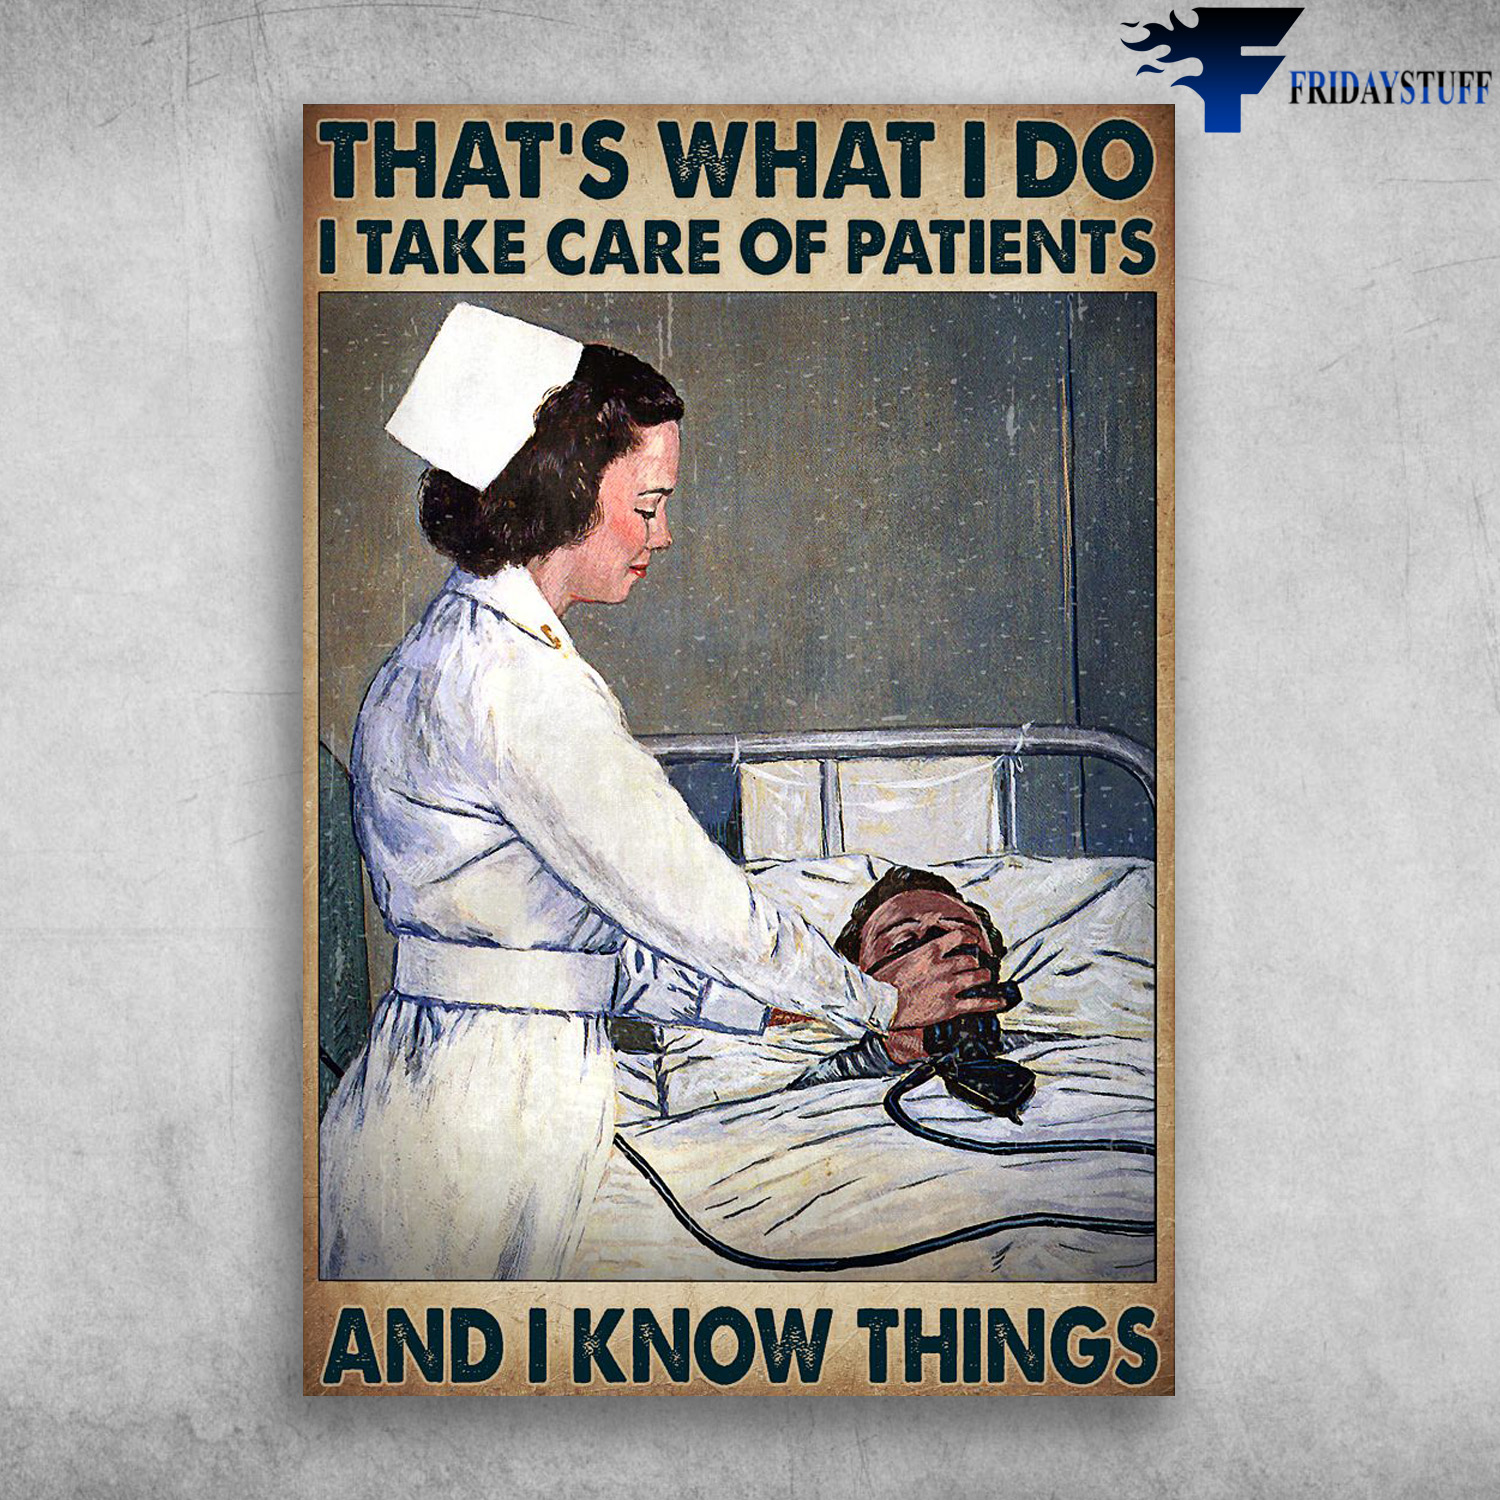 Nurse And Patient - That's What I Do, I Take Care Of Patients, And I Know Things